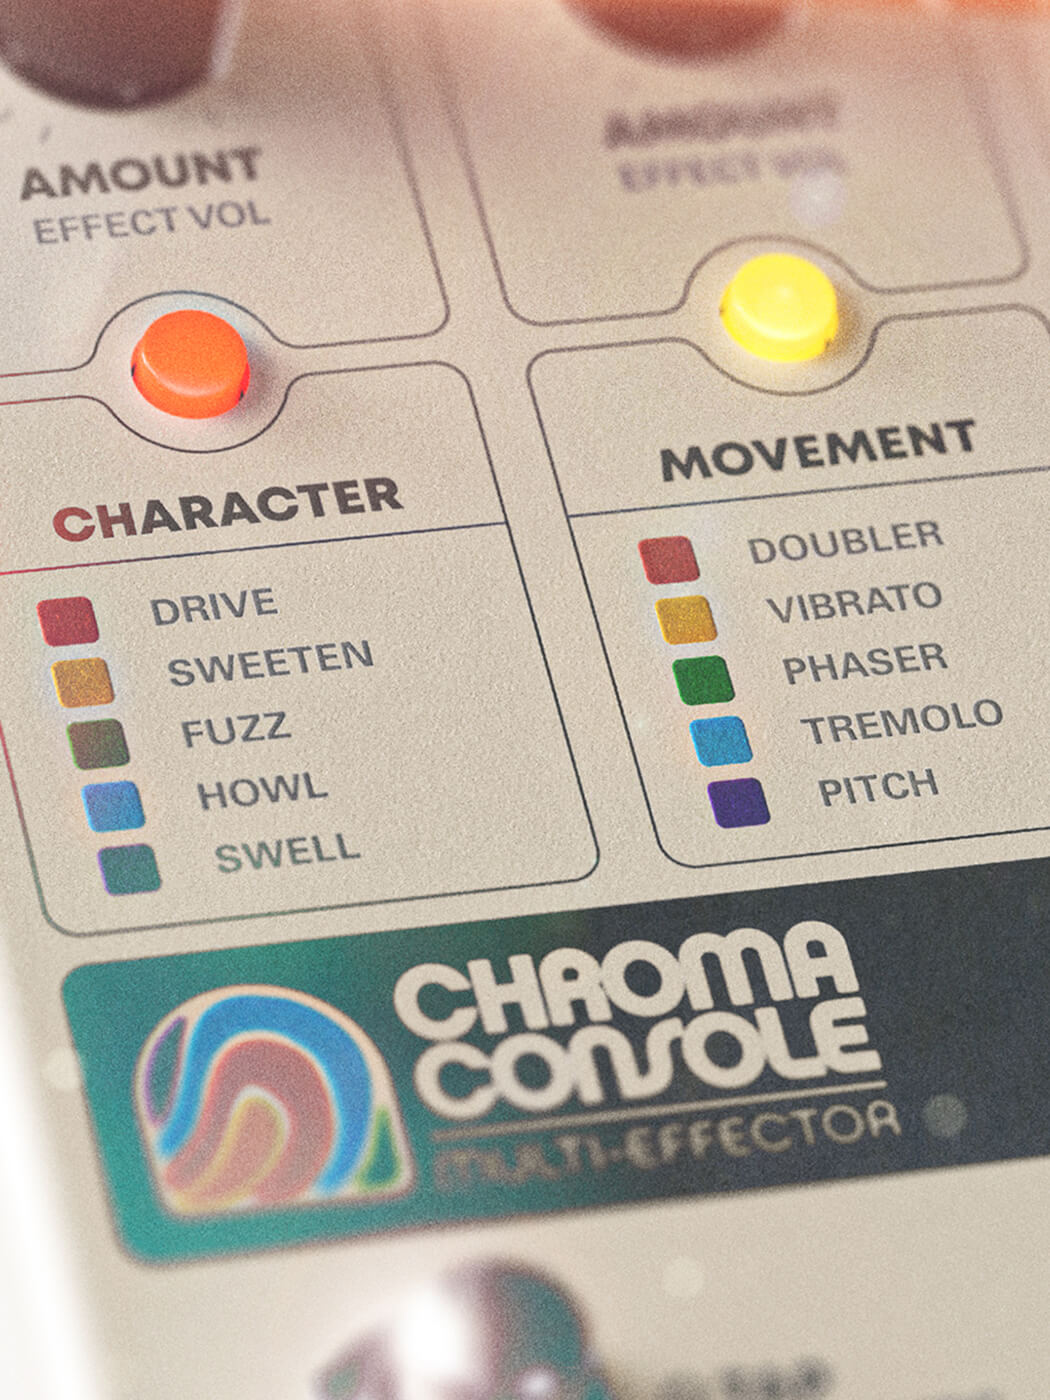 Character and Movement modules on the Chroma Console